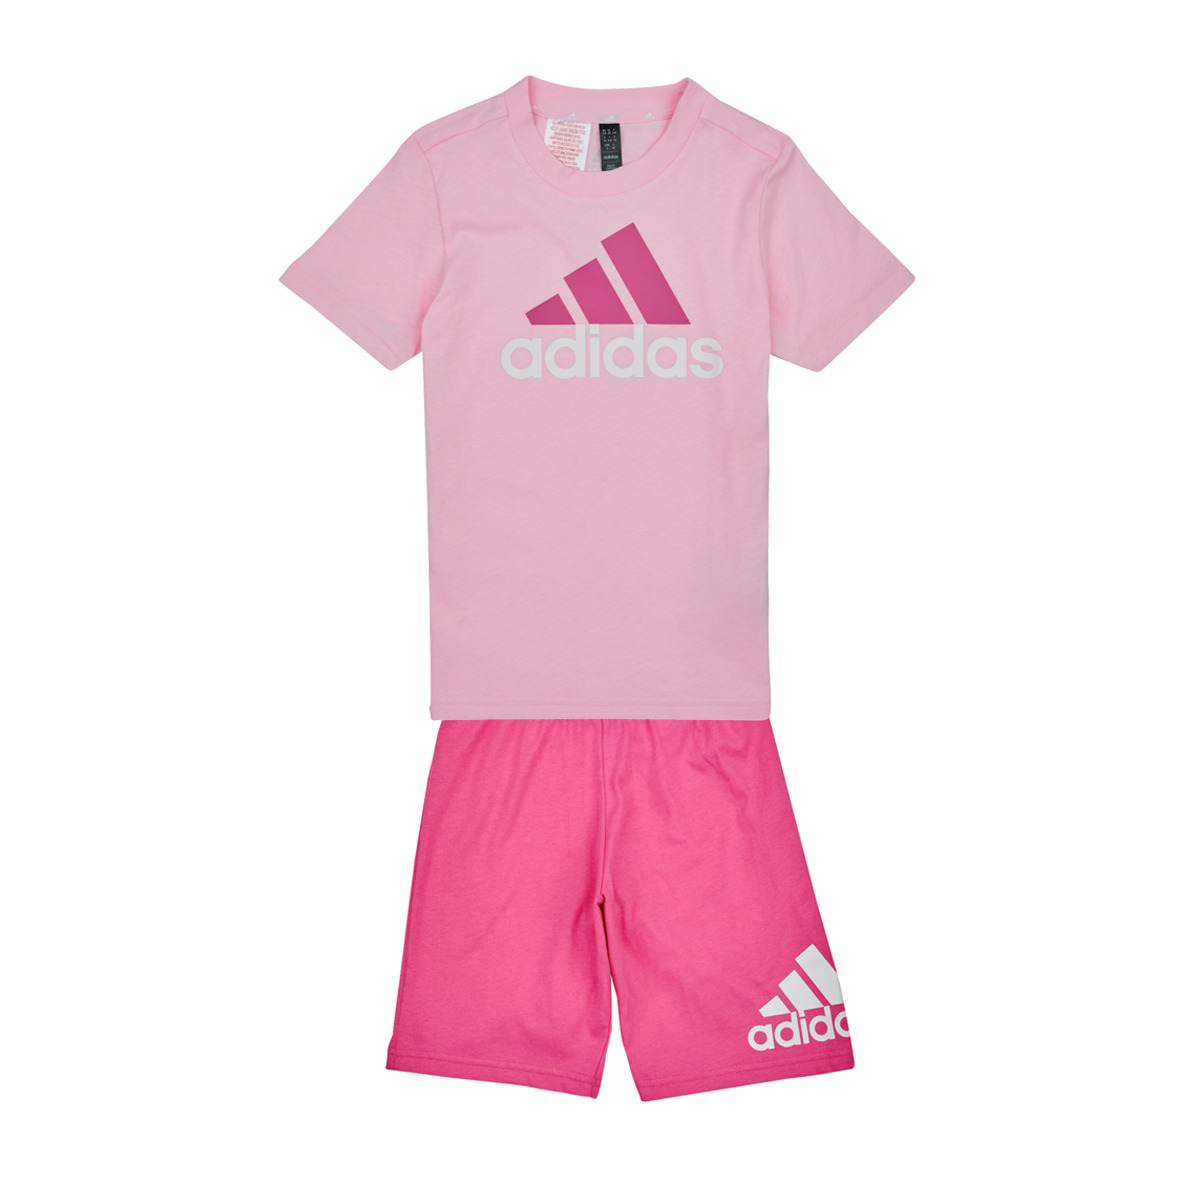 Adidas Sportswear delivery / T BL Europe Clear € - Outfits Fast LK - SET CO Pink | Spartoo Clothing & 31,20 Child ! Sets